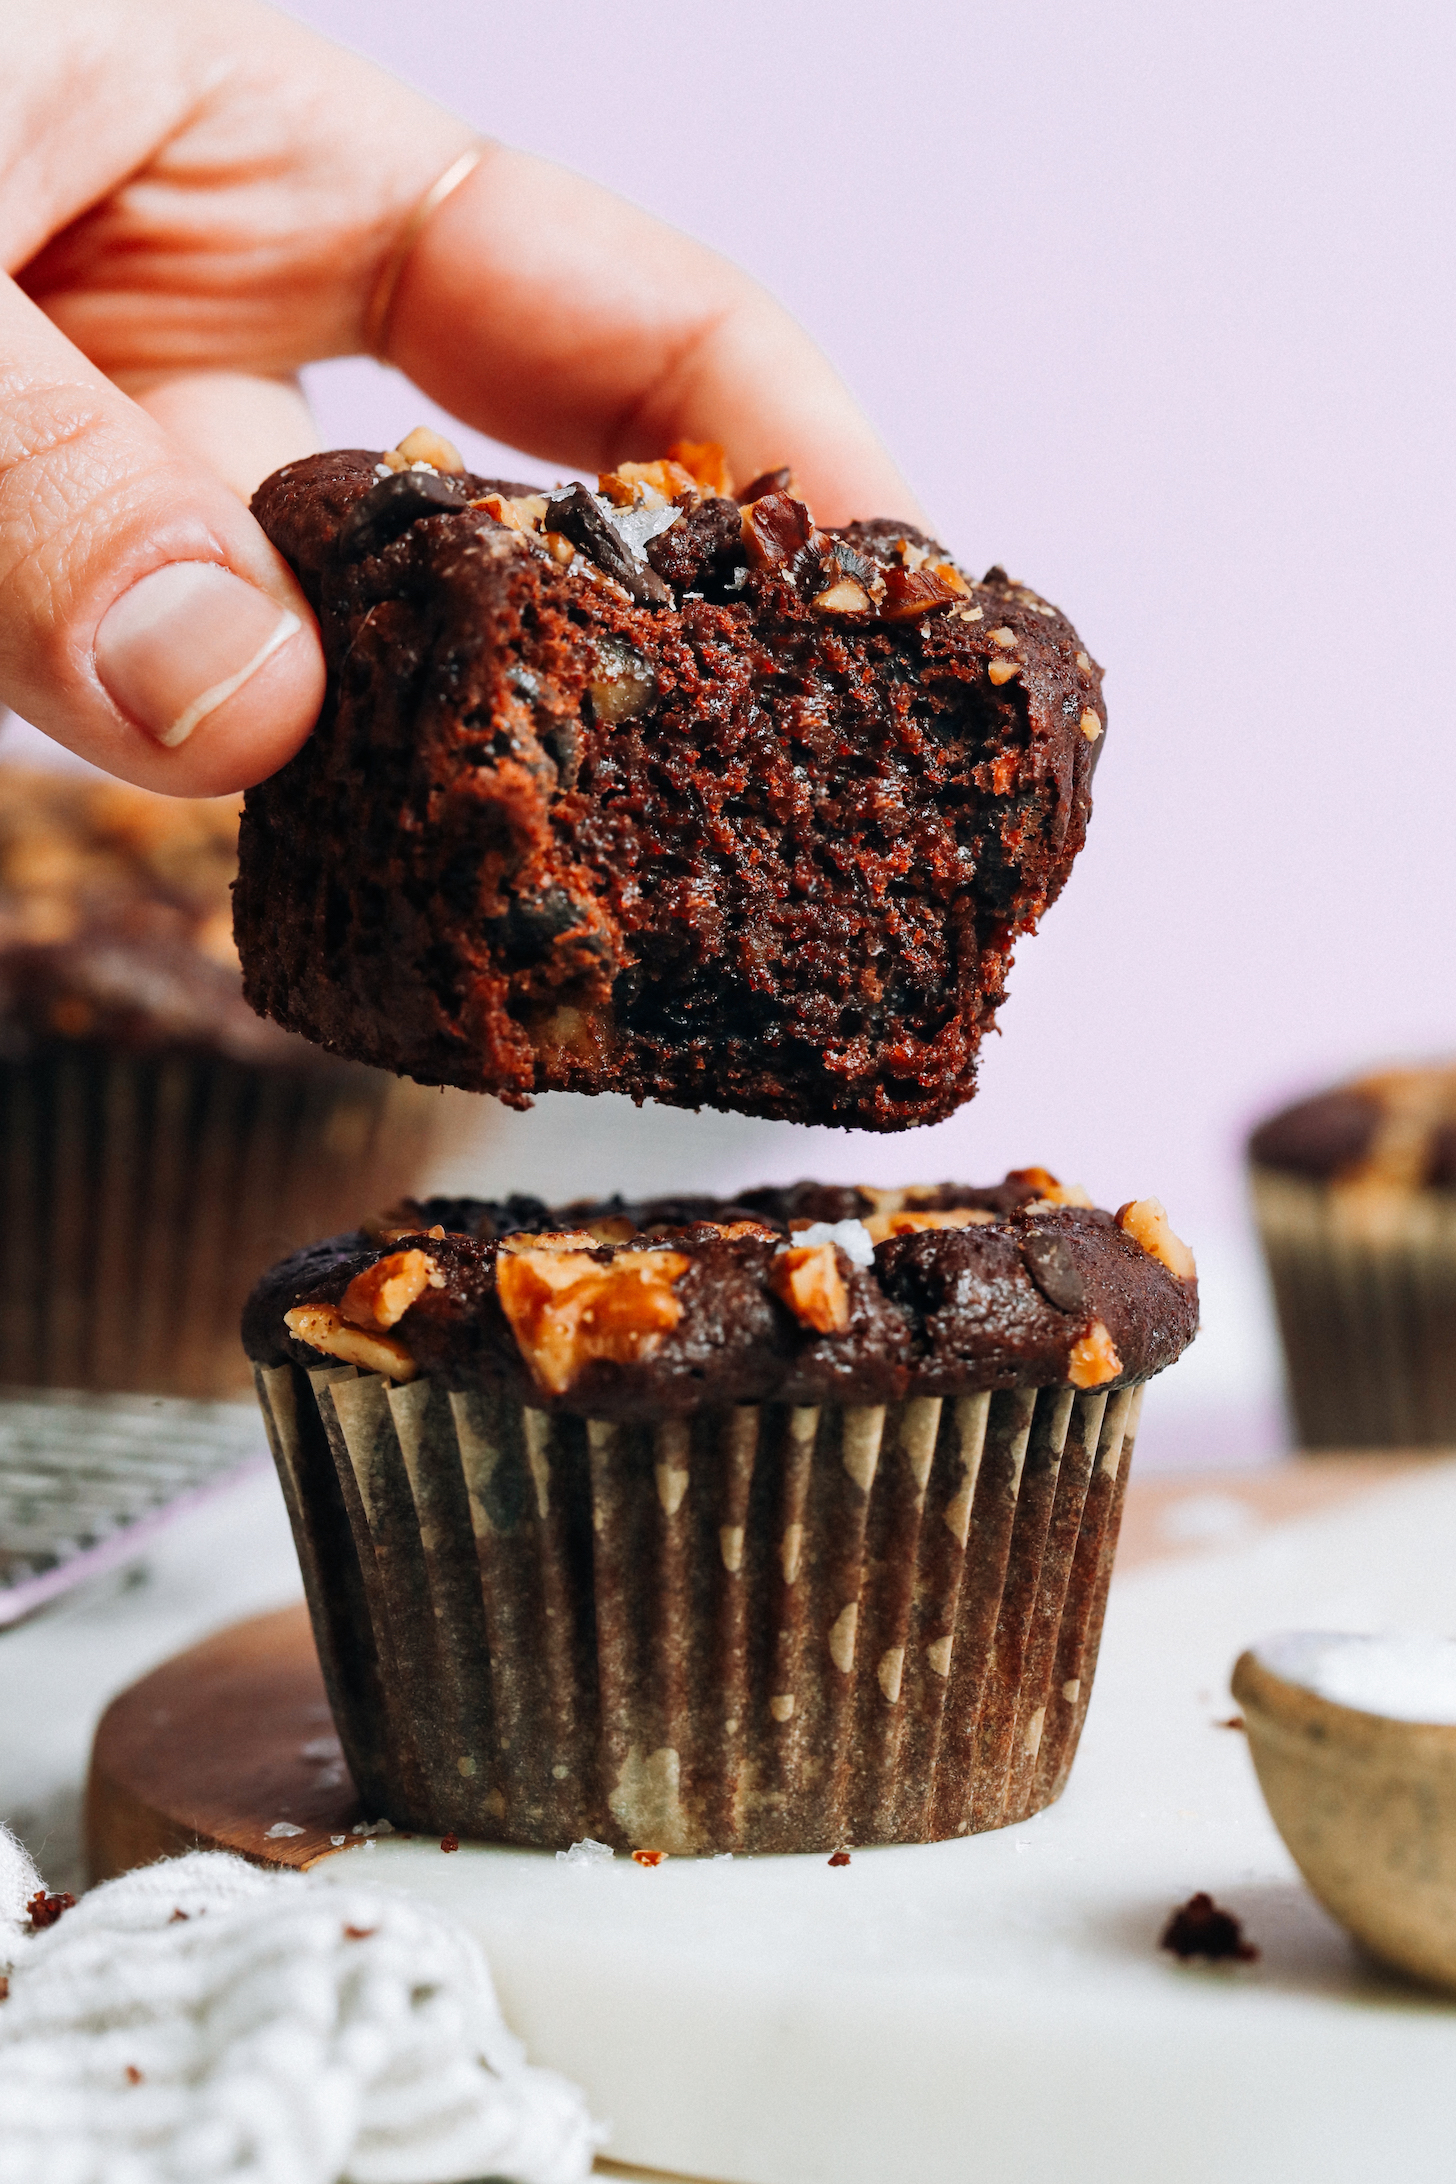 Hold a salted chocolate banana nut muffin to reveal the inner texture